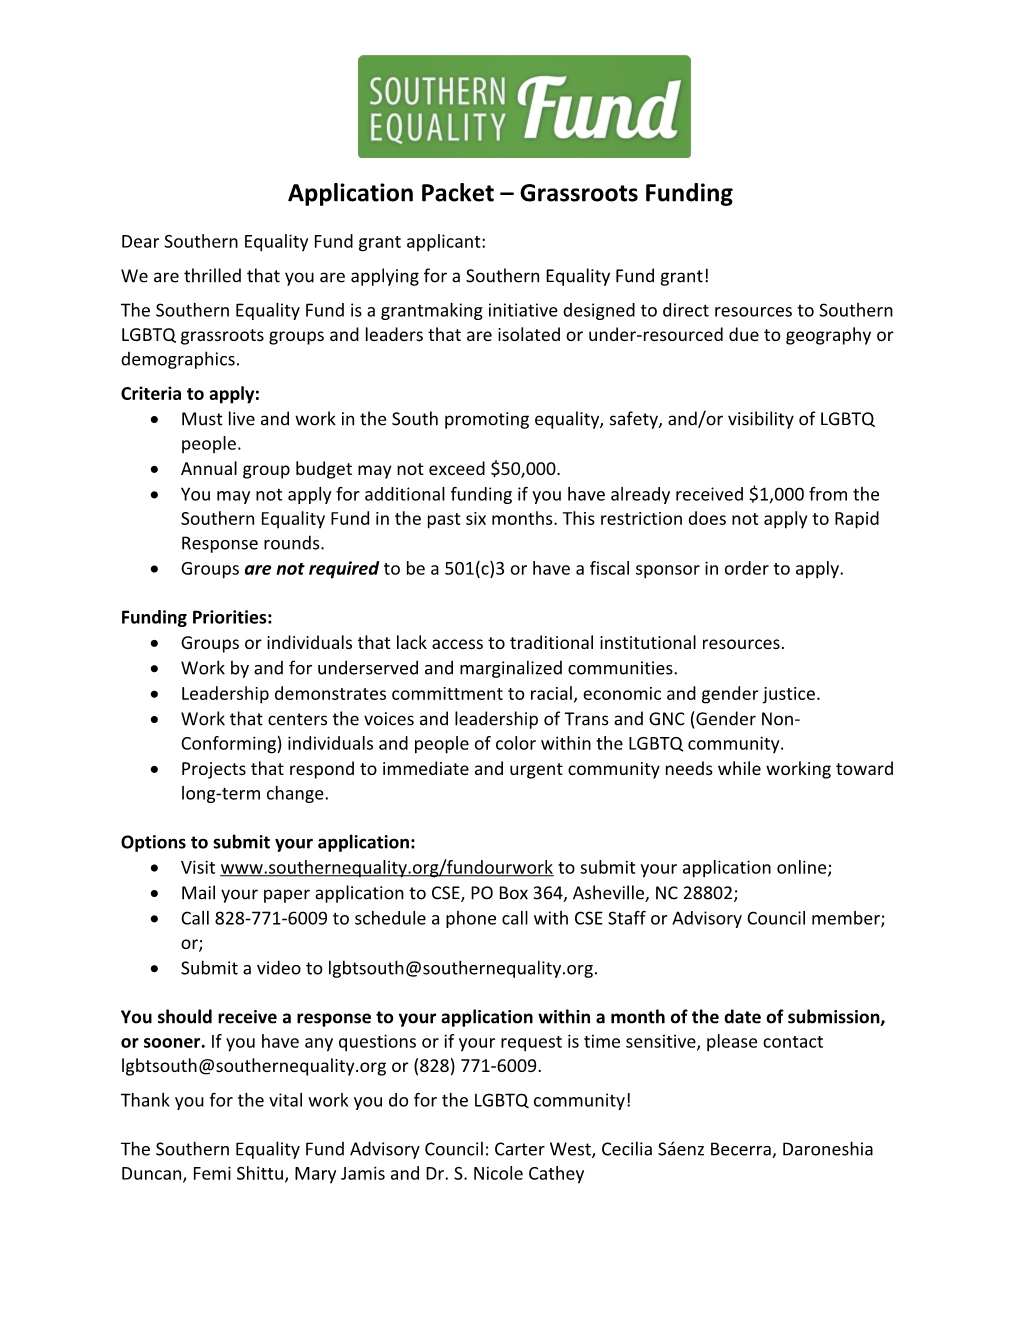 Application Packet Grassroots Funding